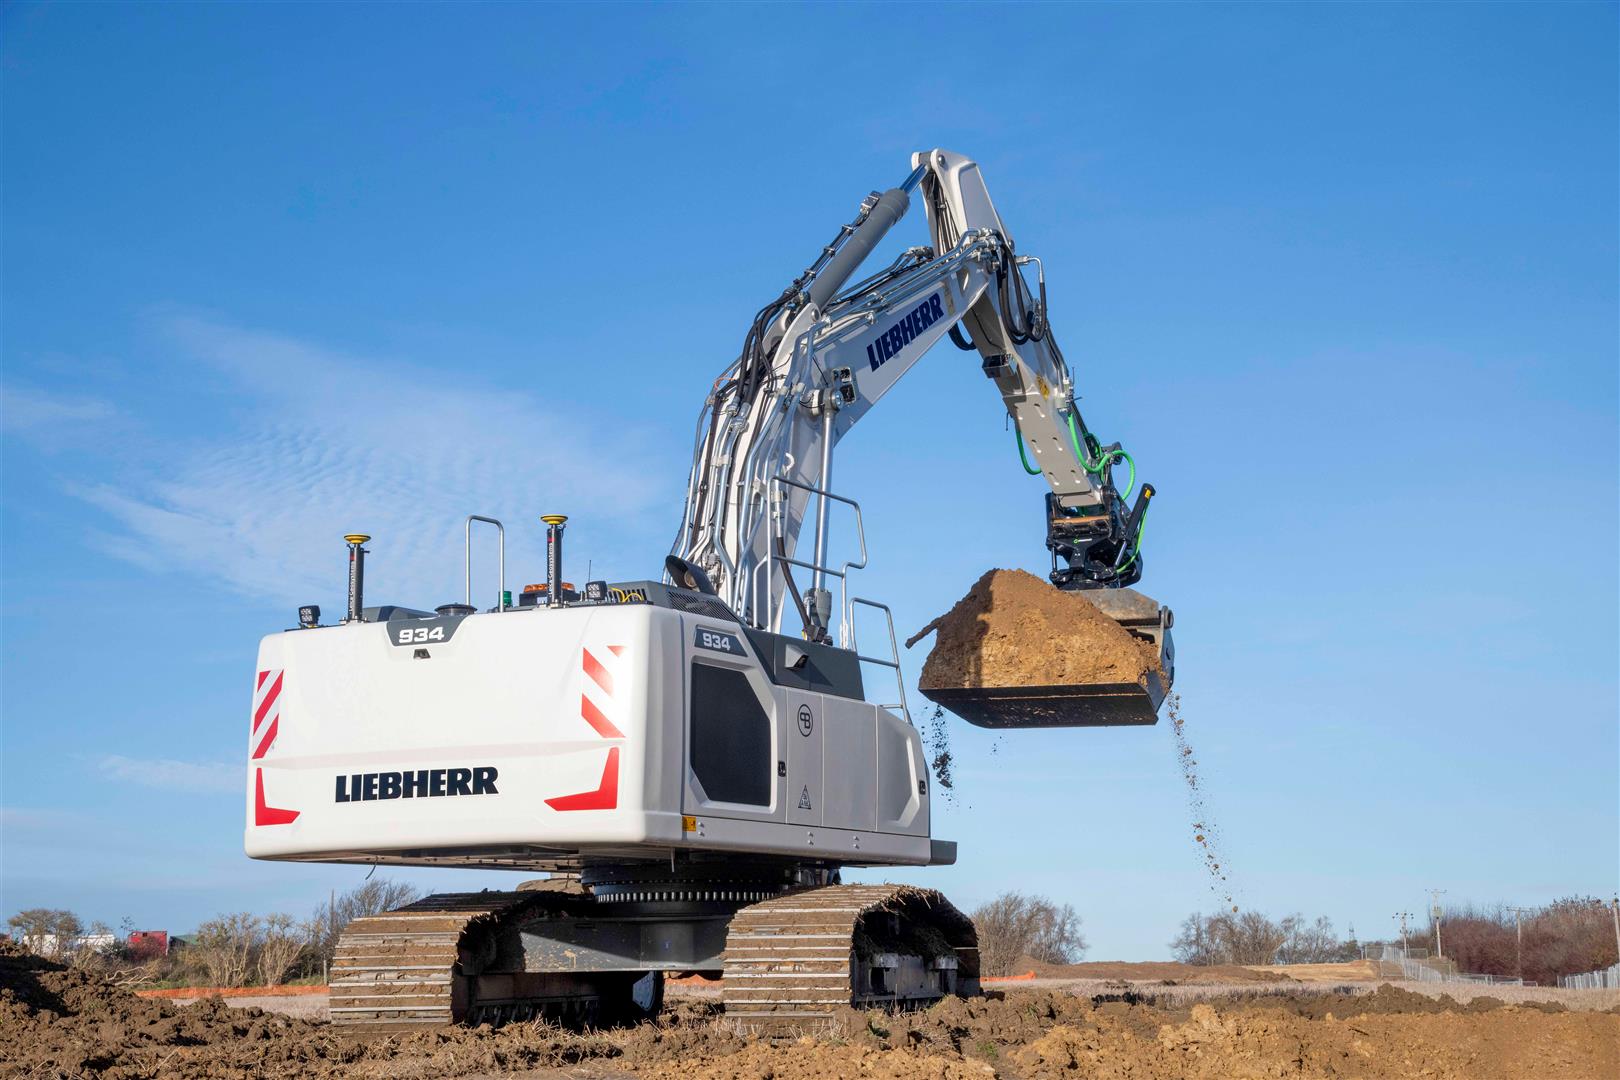 A Liebherr R 934 G8 crawler excavator, the first hydraulic excavator with a factory-fitted Leica Geosystems machine control system, has been delivered to customer Brad-Pave in Great Britain.